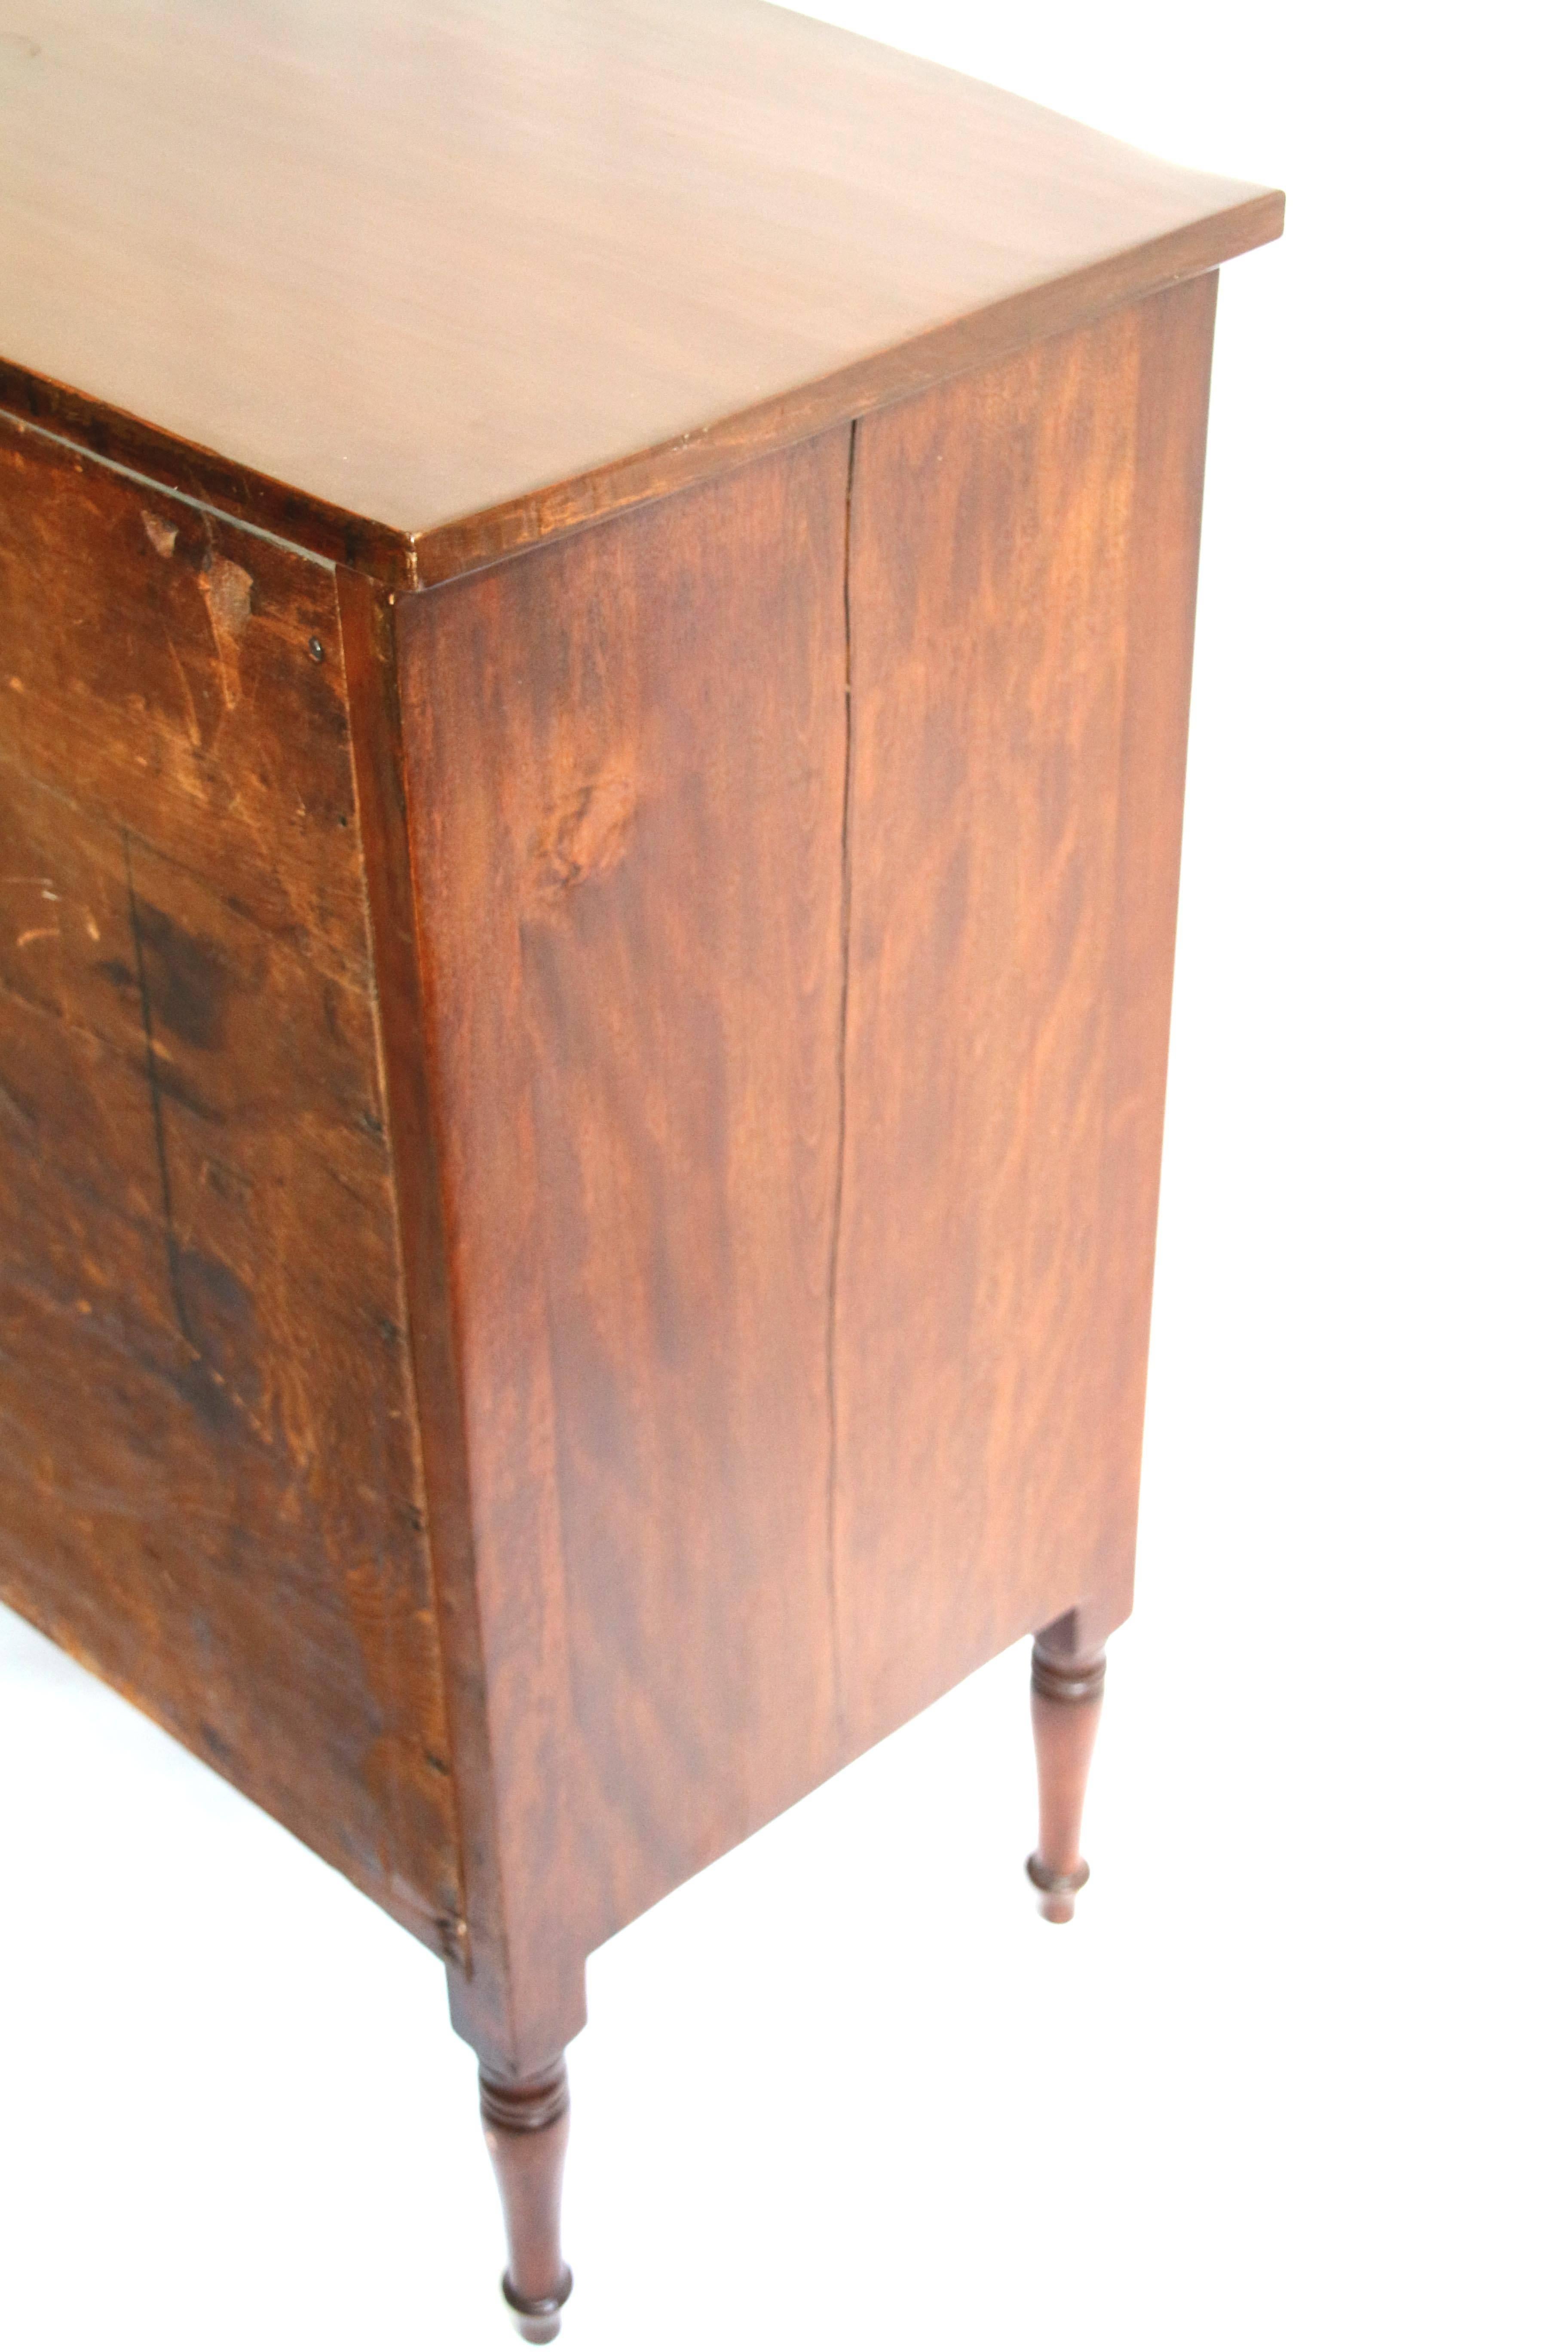 19th Century Sheraton Four-Drawer Inlaid Bowfront Chest of Drawers For Sale 5